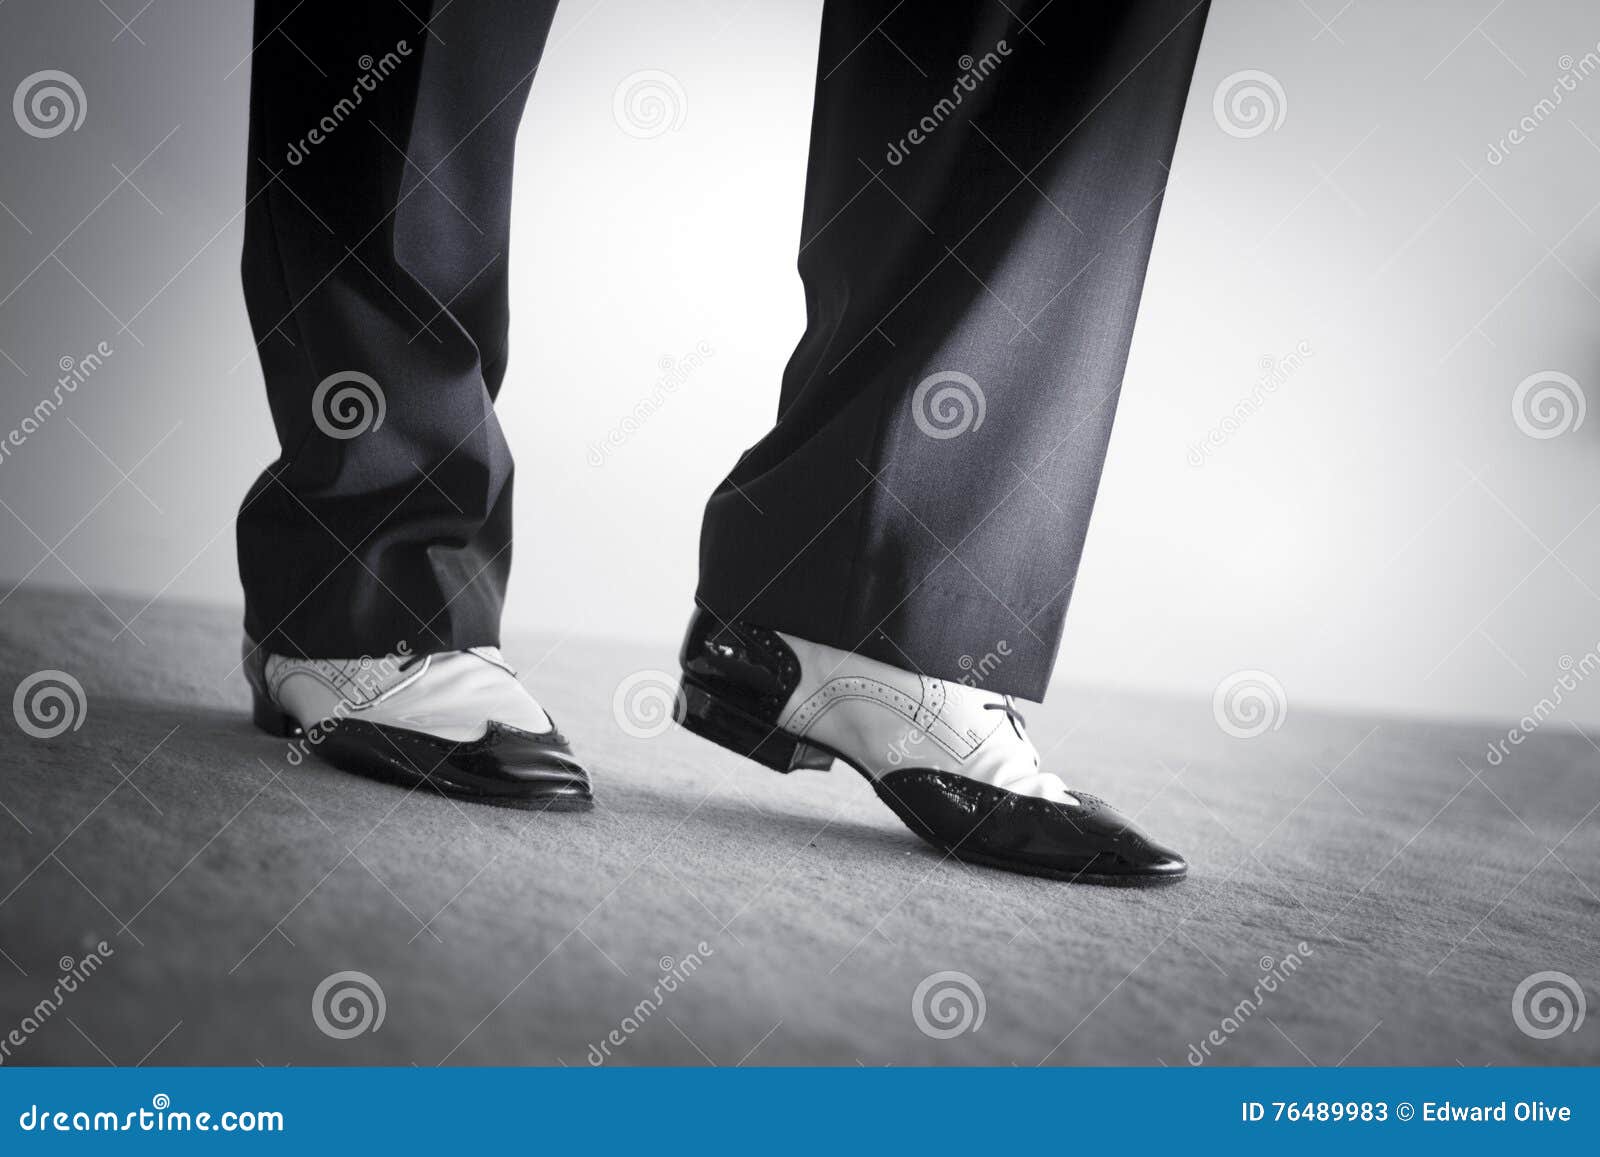 Male dancer dancing shoes stock image. Image of performance - 76489983